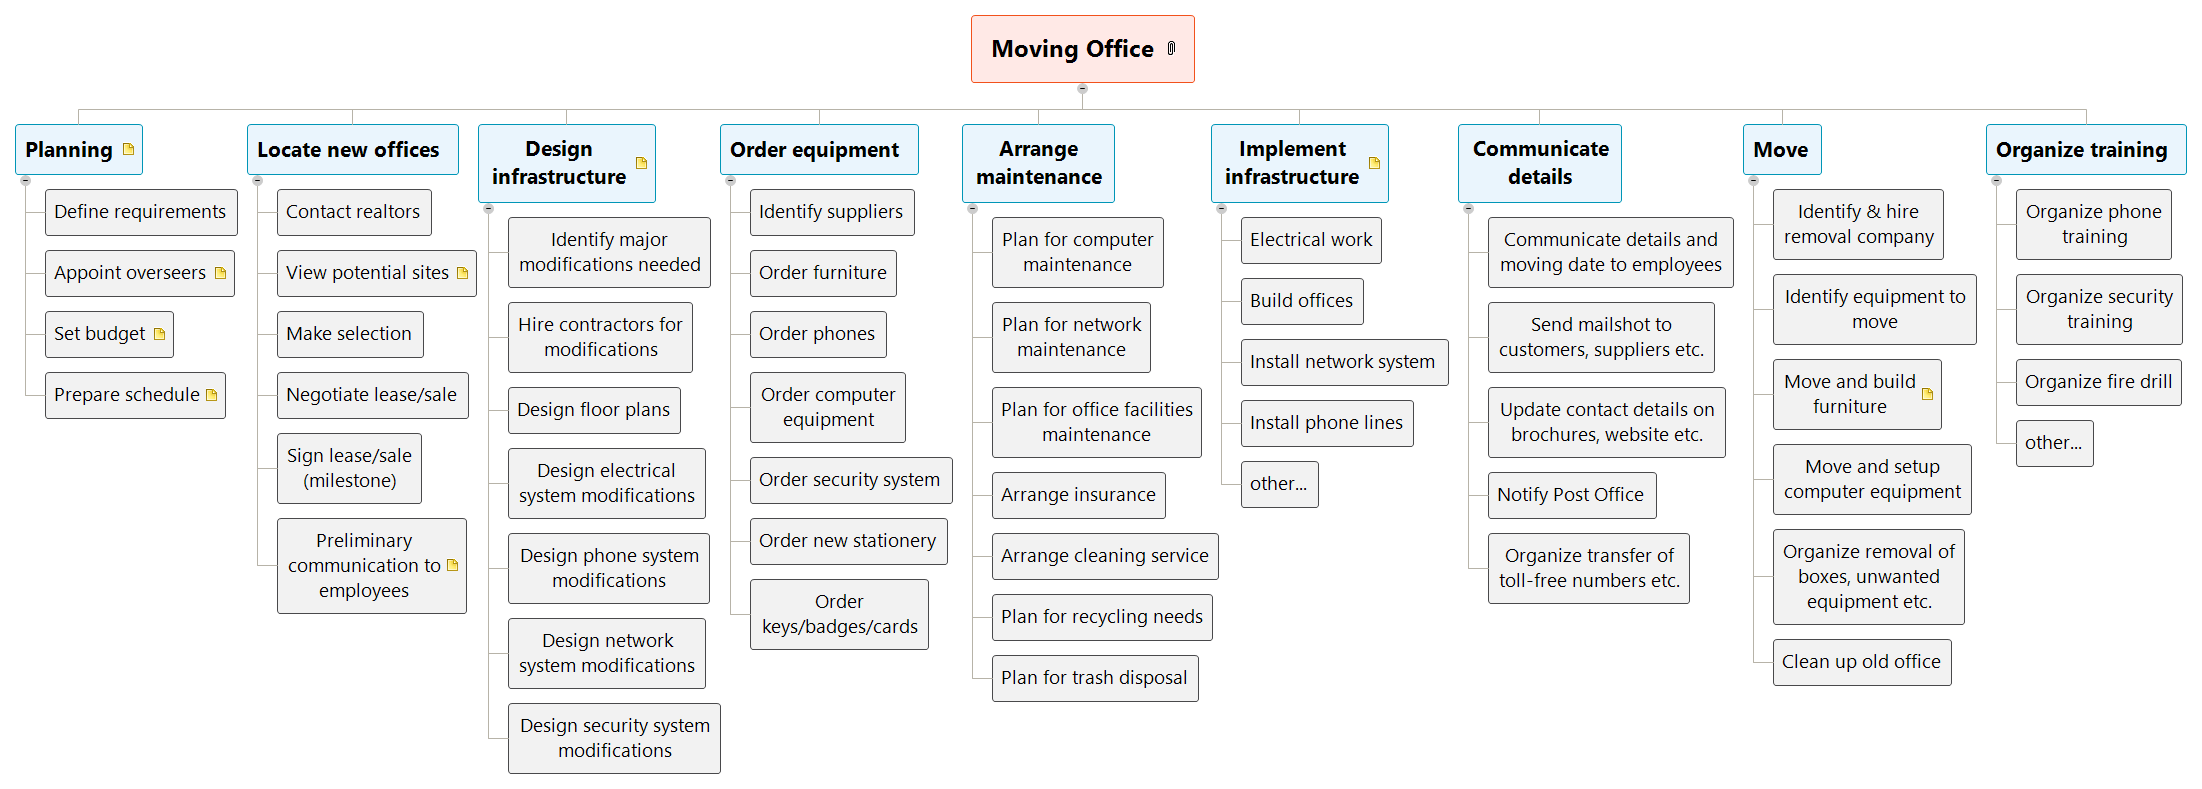 moving an office, wbs example, work breakdown structure